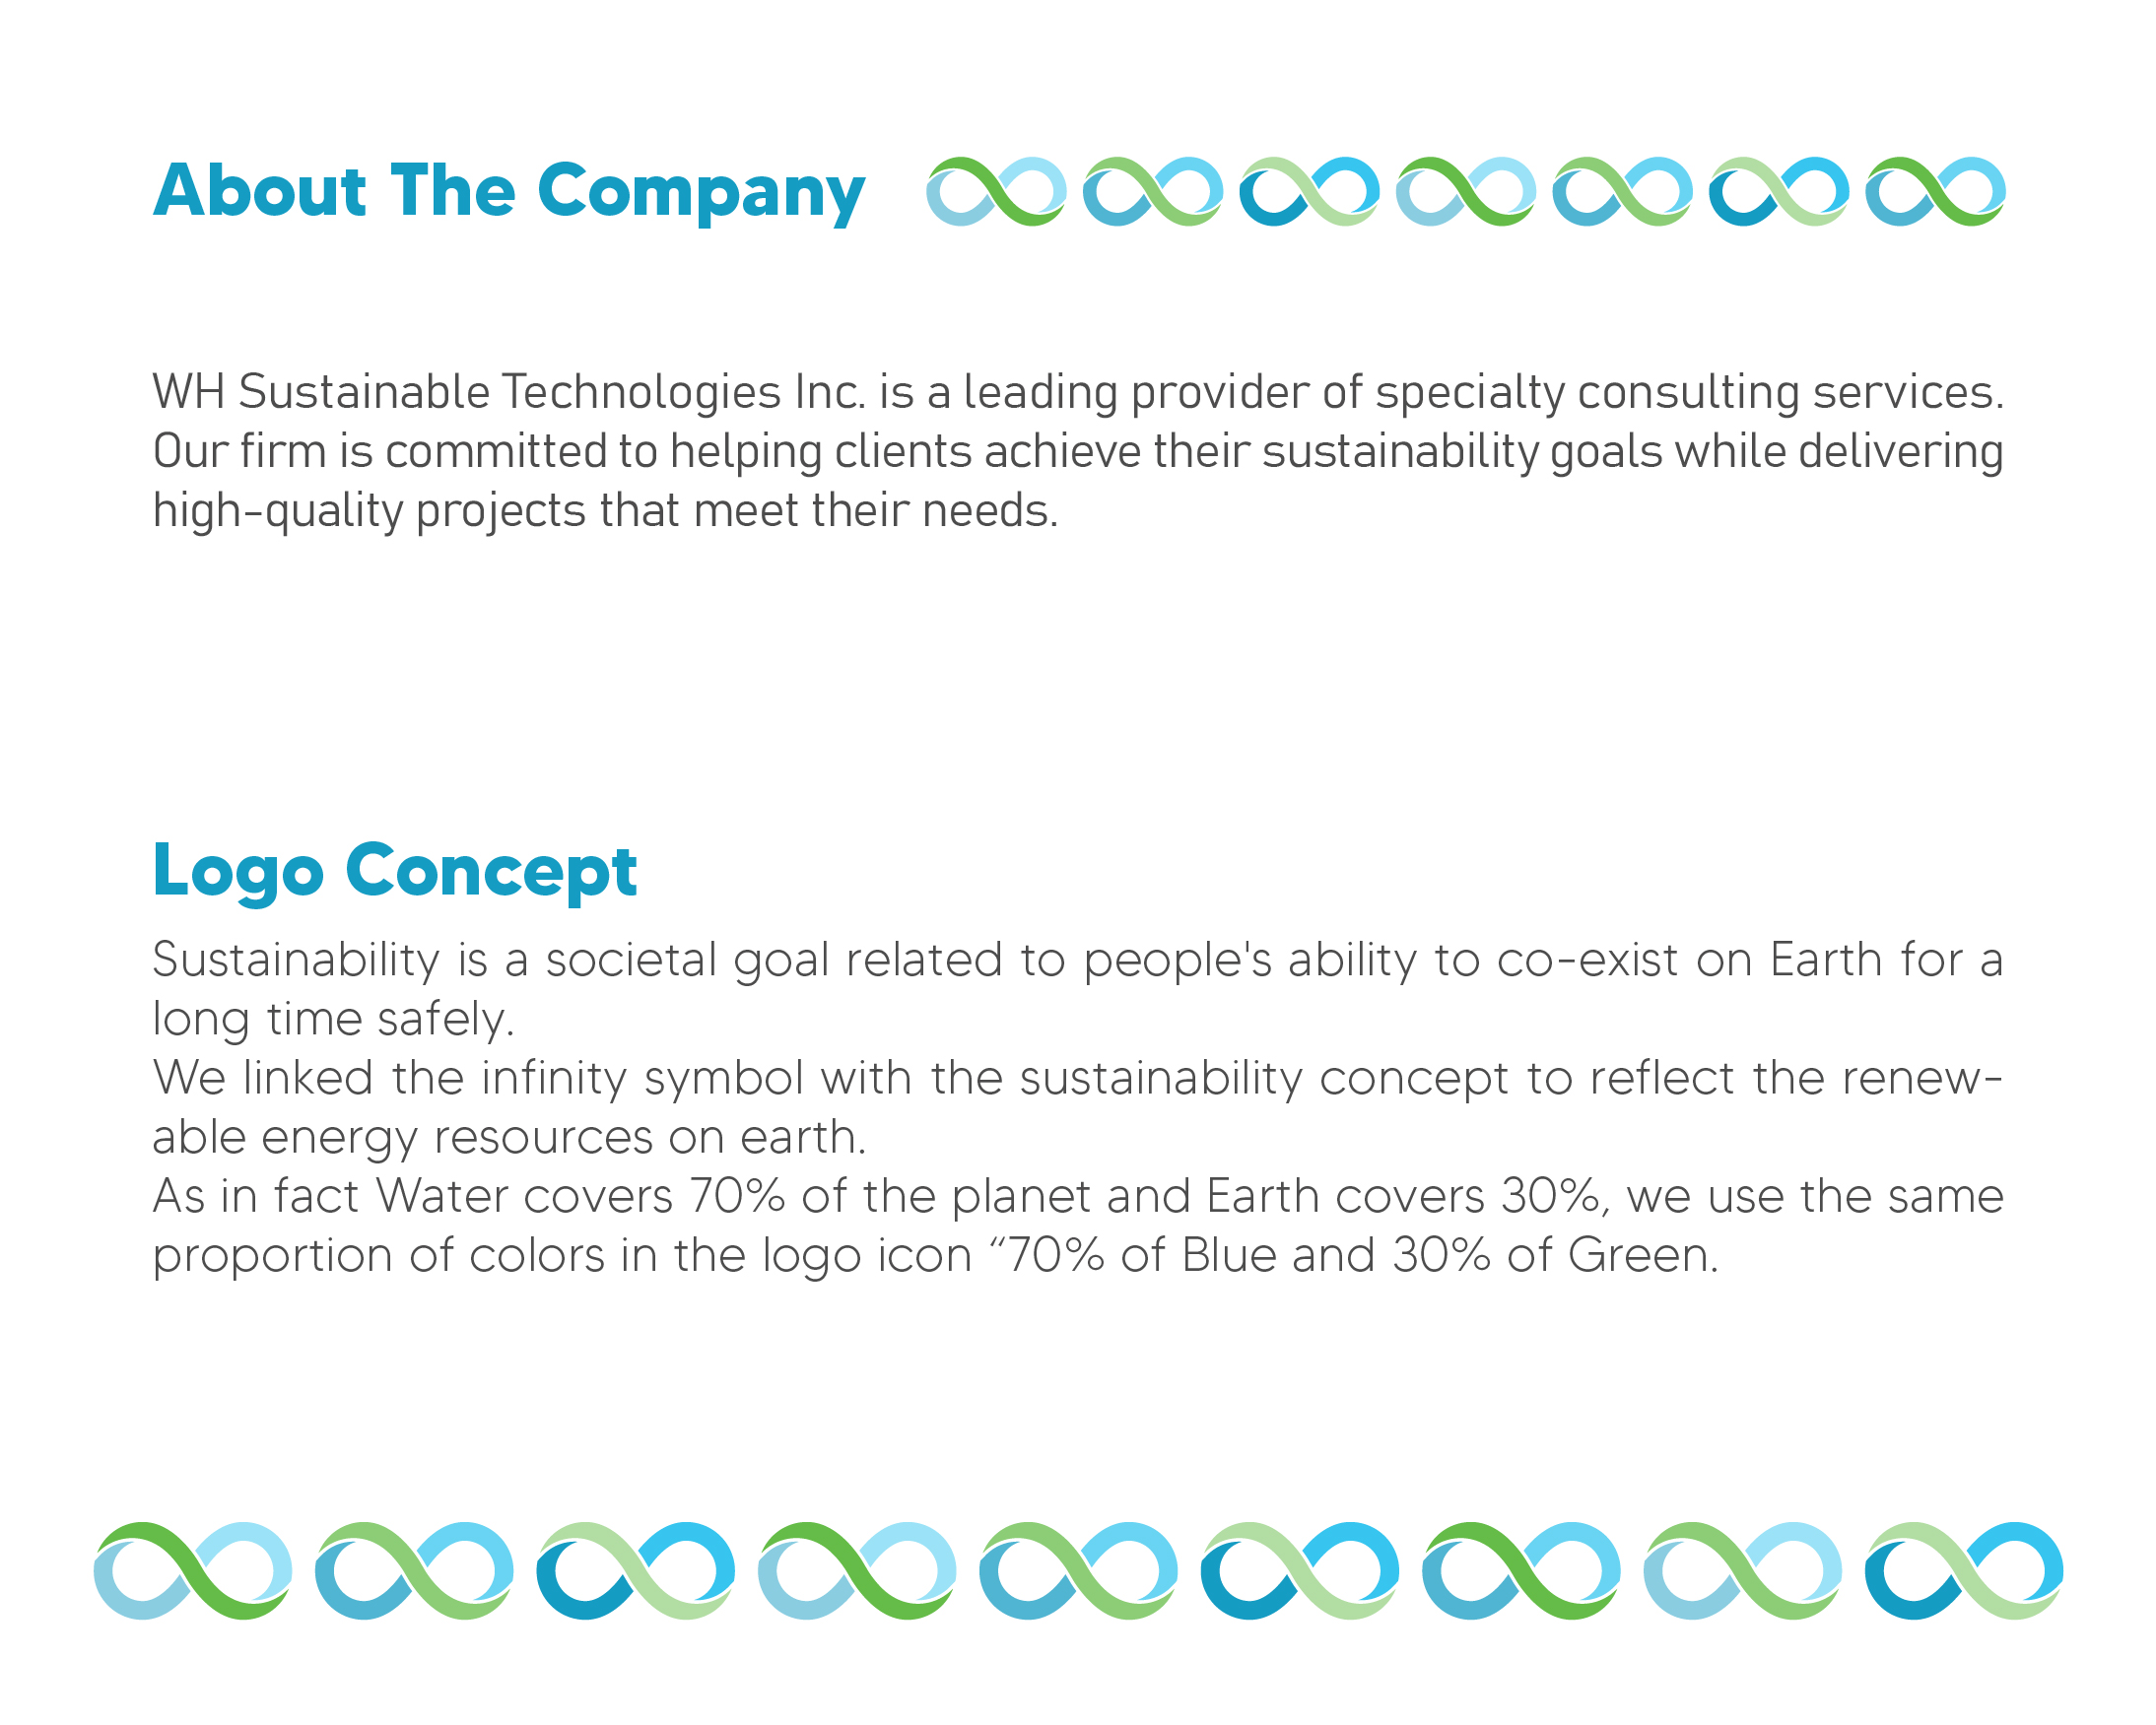 SUSTECH WH Sustainable Technologies Inc.